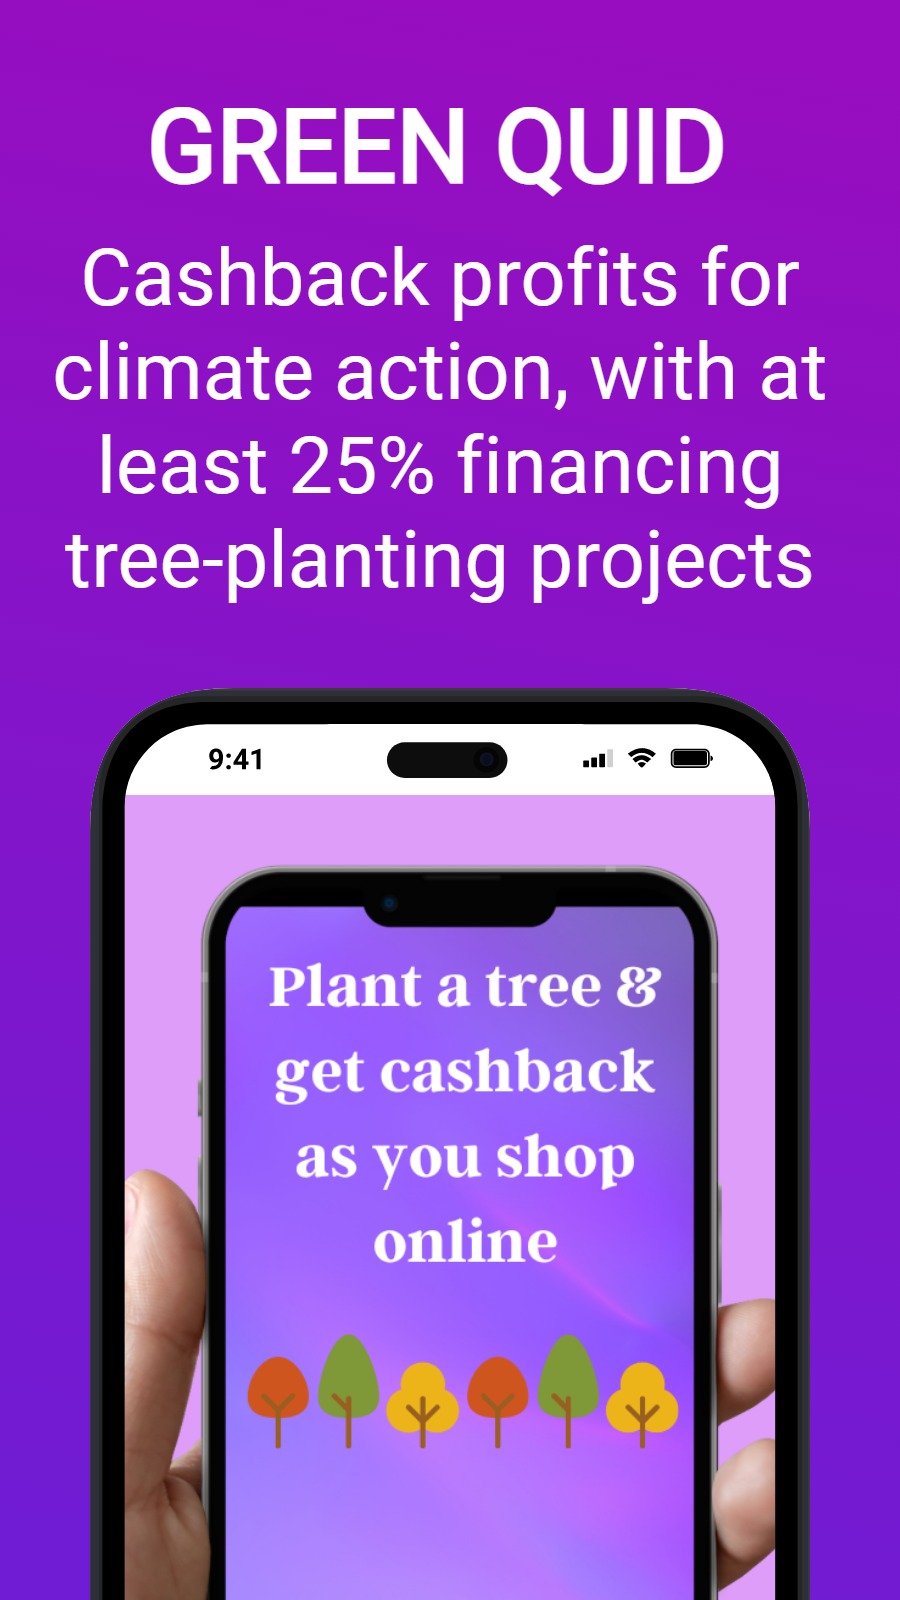 GREEN QUID - Cashback profits for climate action, with at least 25% financing tree-planting projects